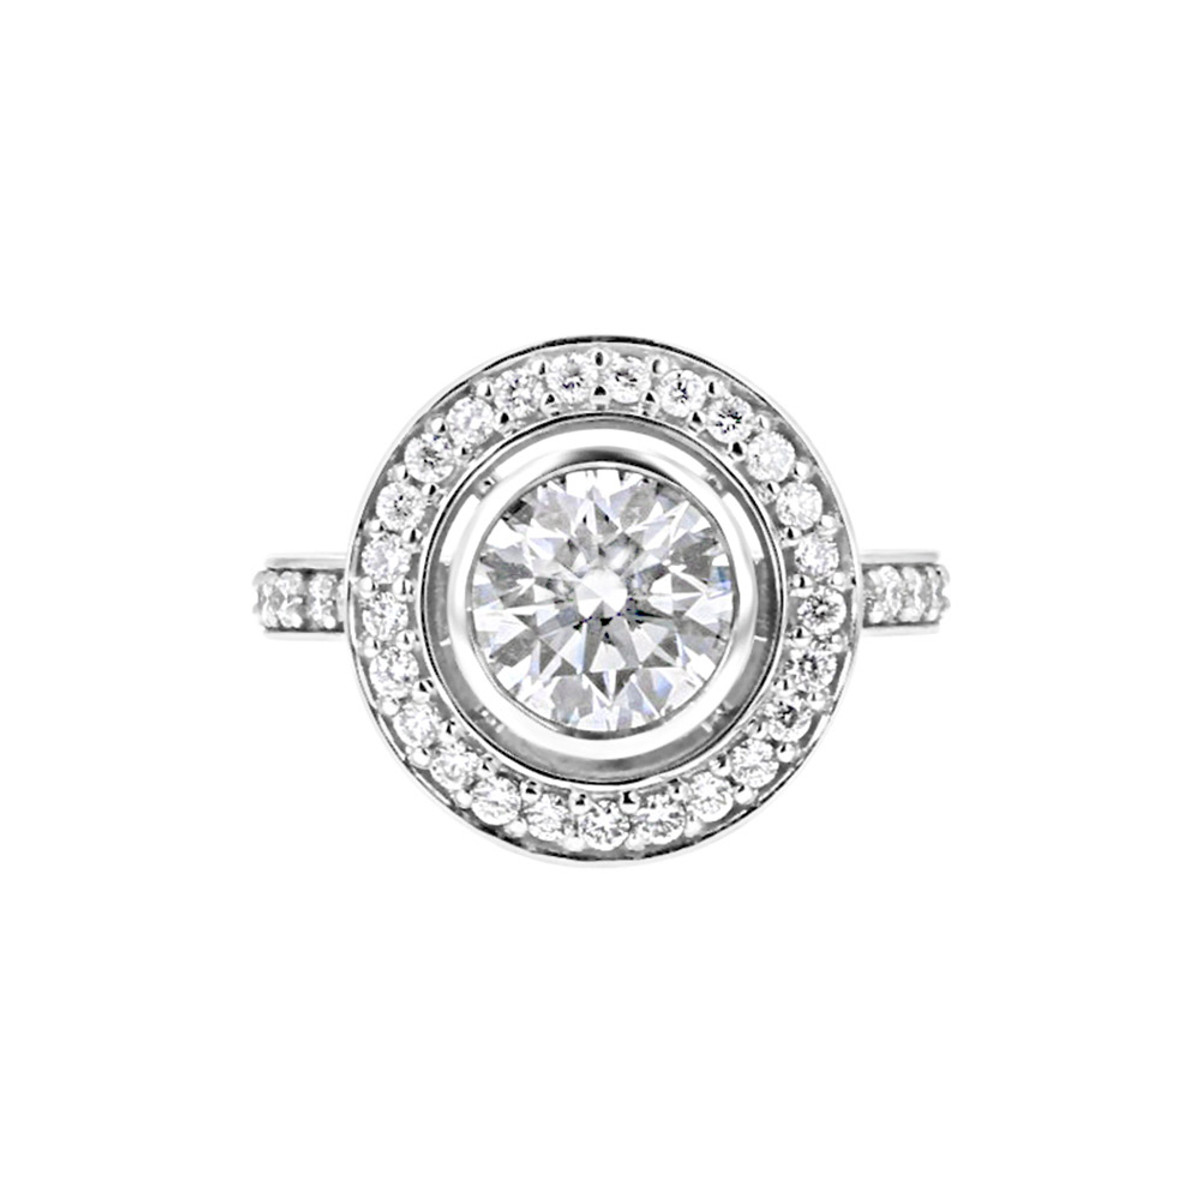 Engage 19KT White Gold & 1.50CT GIA Diamond Solitaire Halo Engagement Ring-DSCRD0438 Product Image